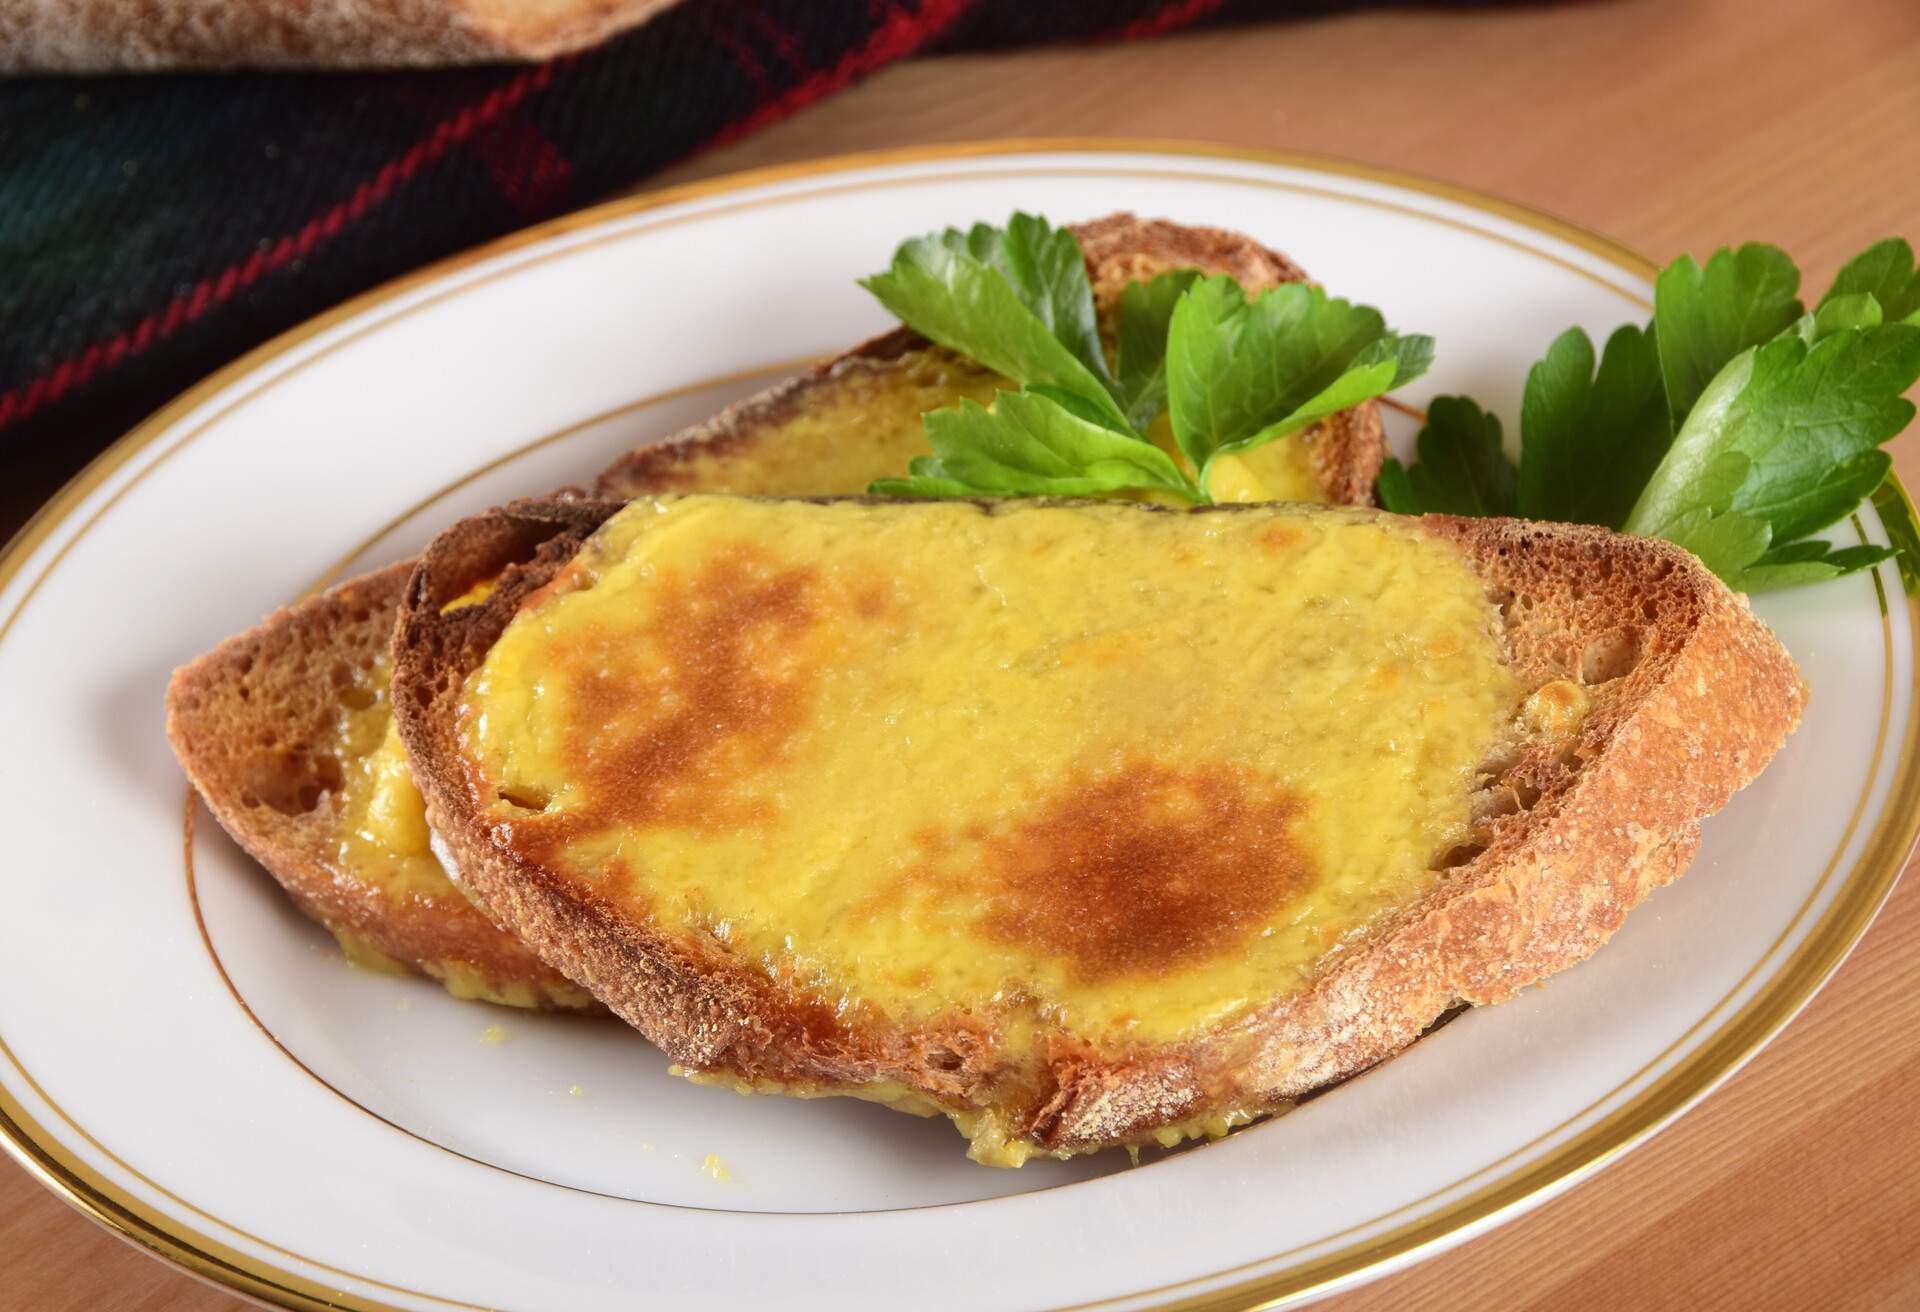 Traditional Welsh Rarebit - toast topped with a sauce of melted cheese, beer, mustard and Worcestershire sauce.